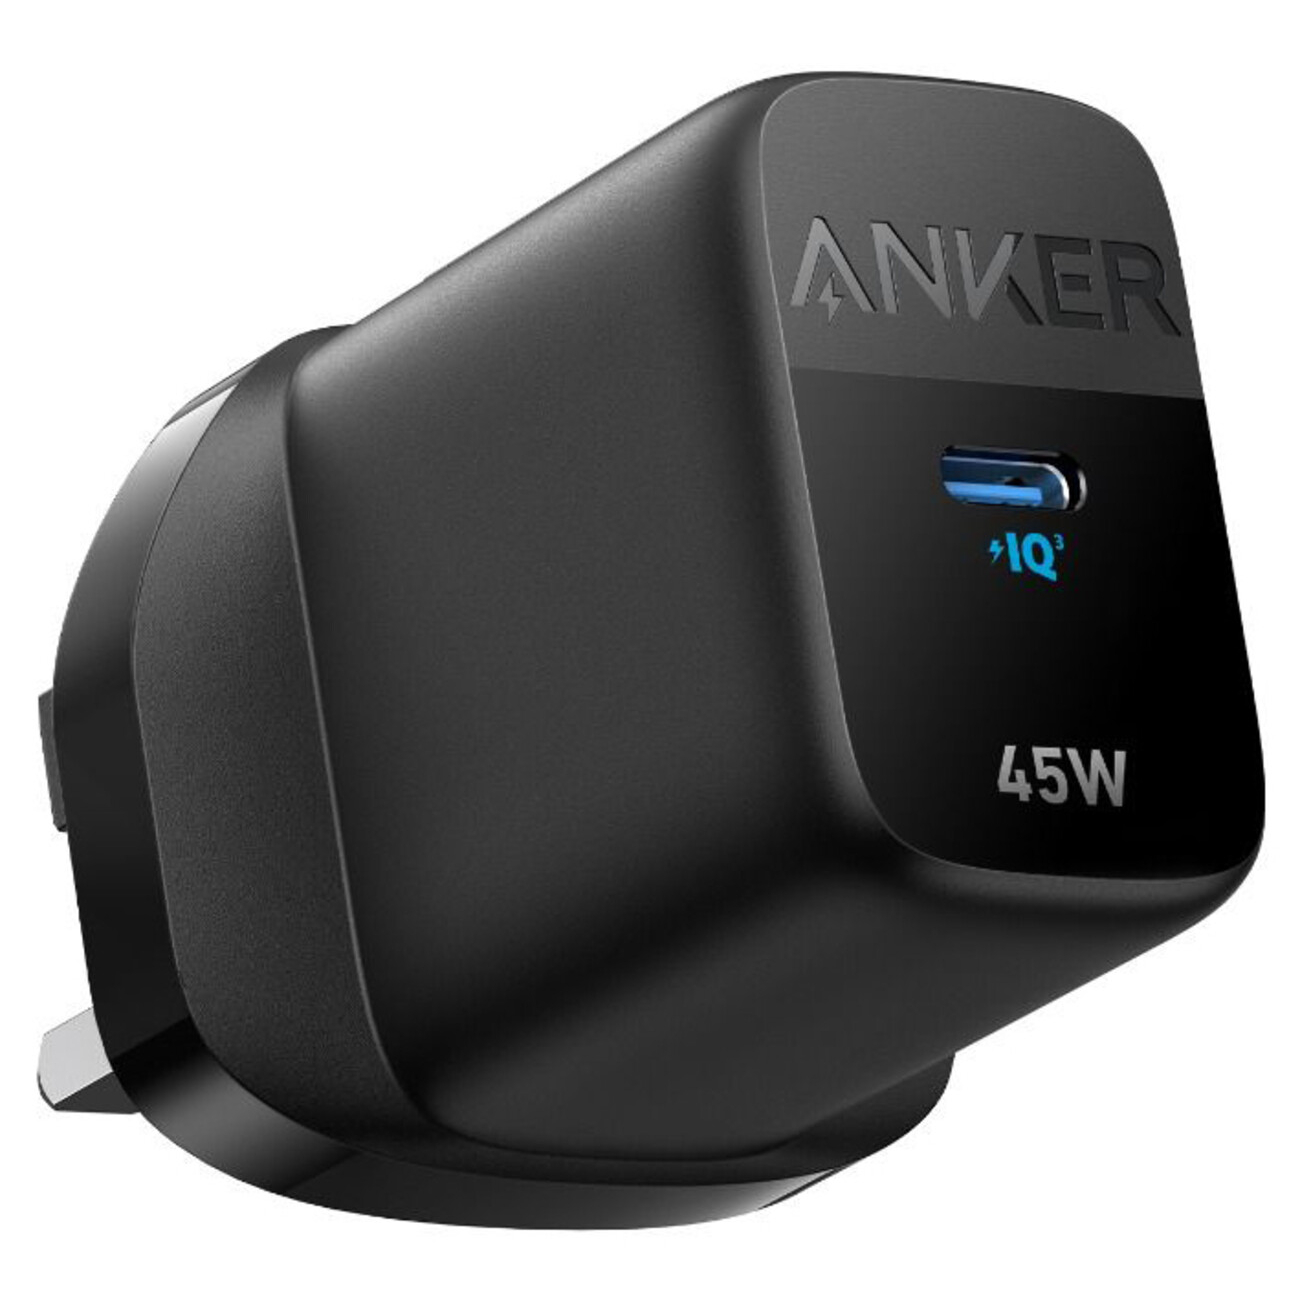 Anker 313 Charger (45W) Black